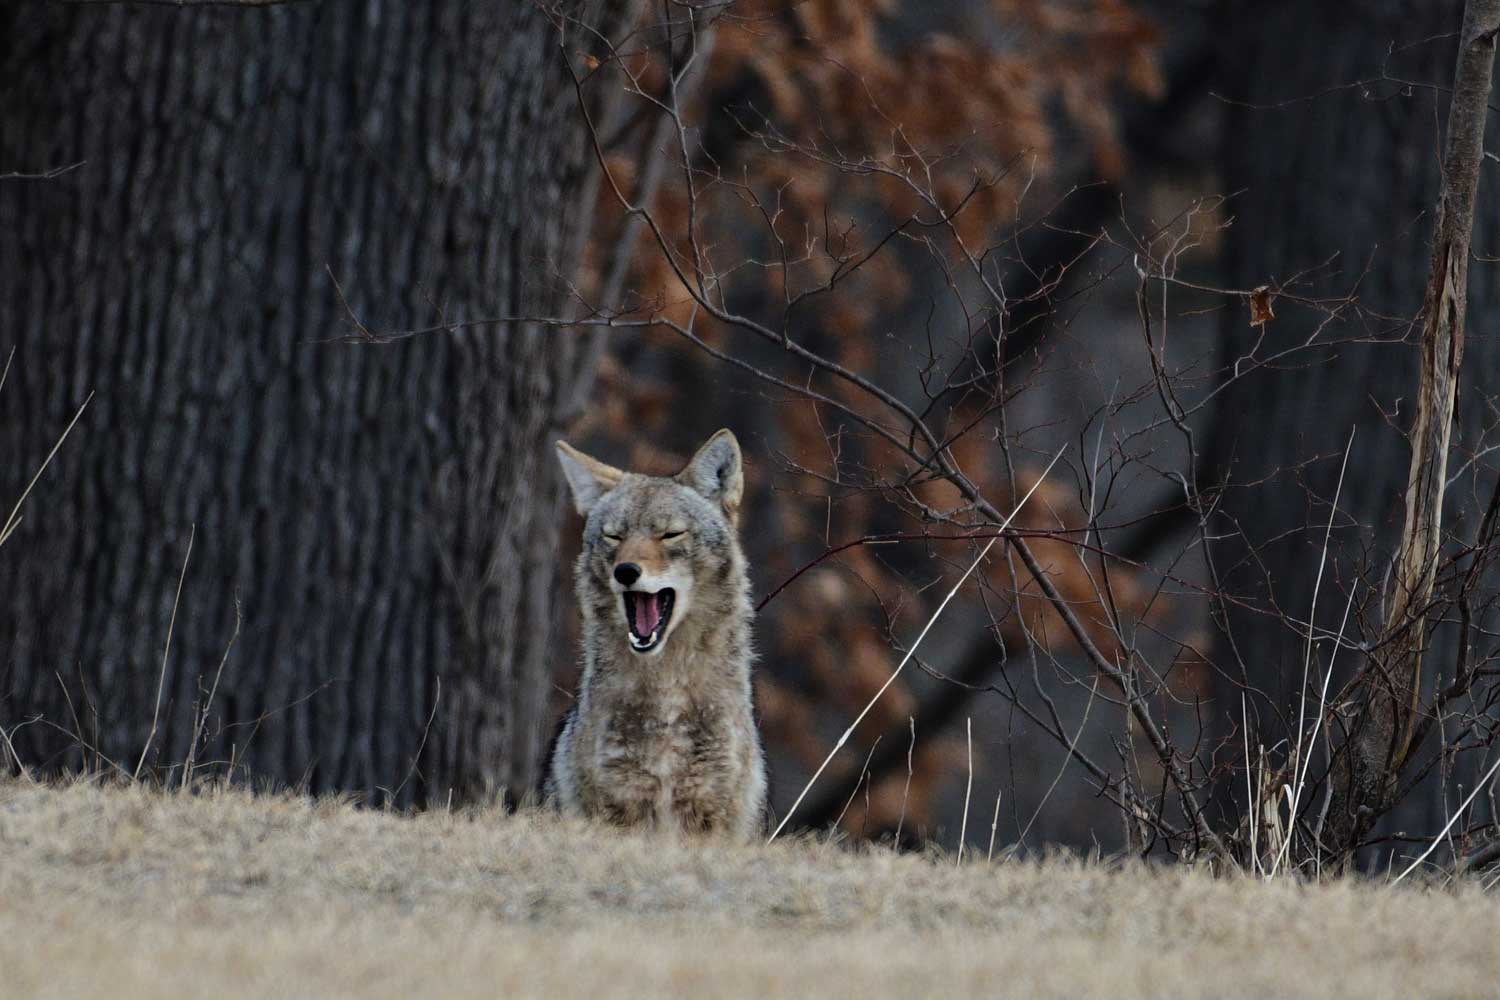 A coyote sitting in a forest with its mouth open. 